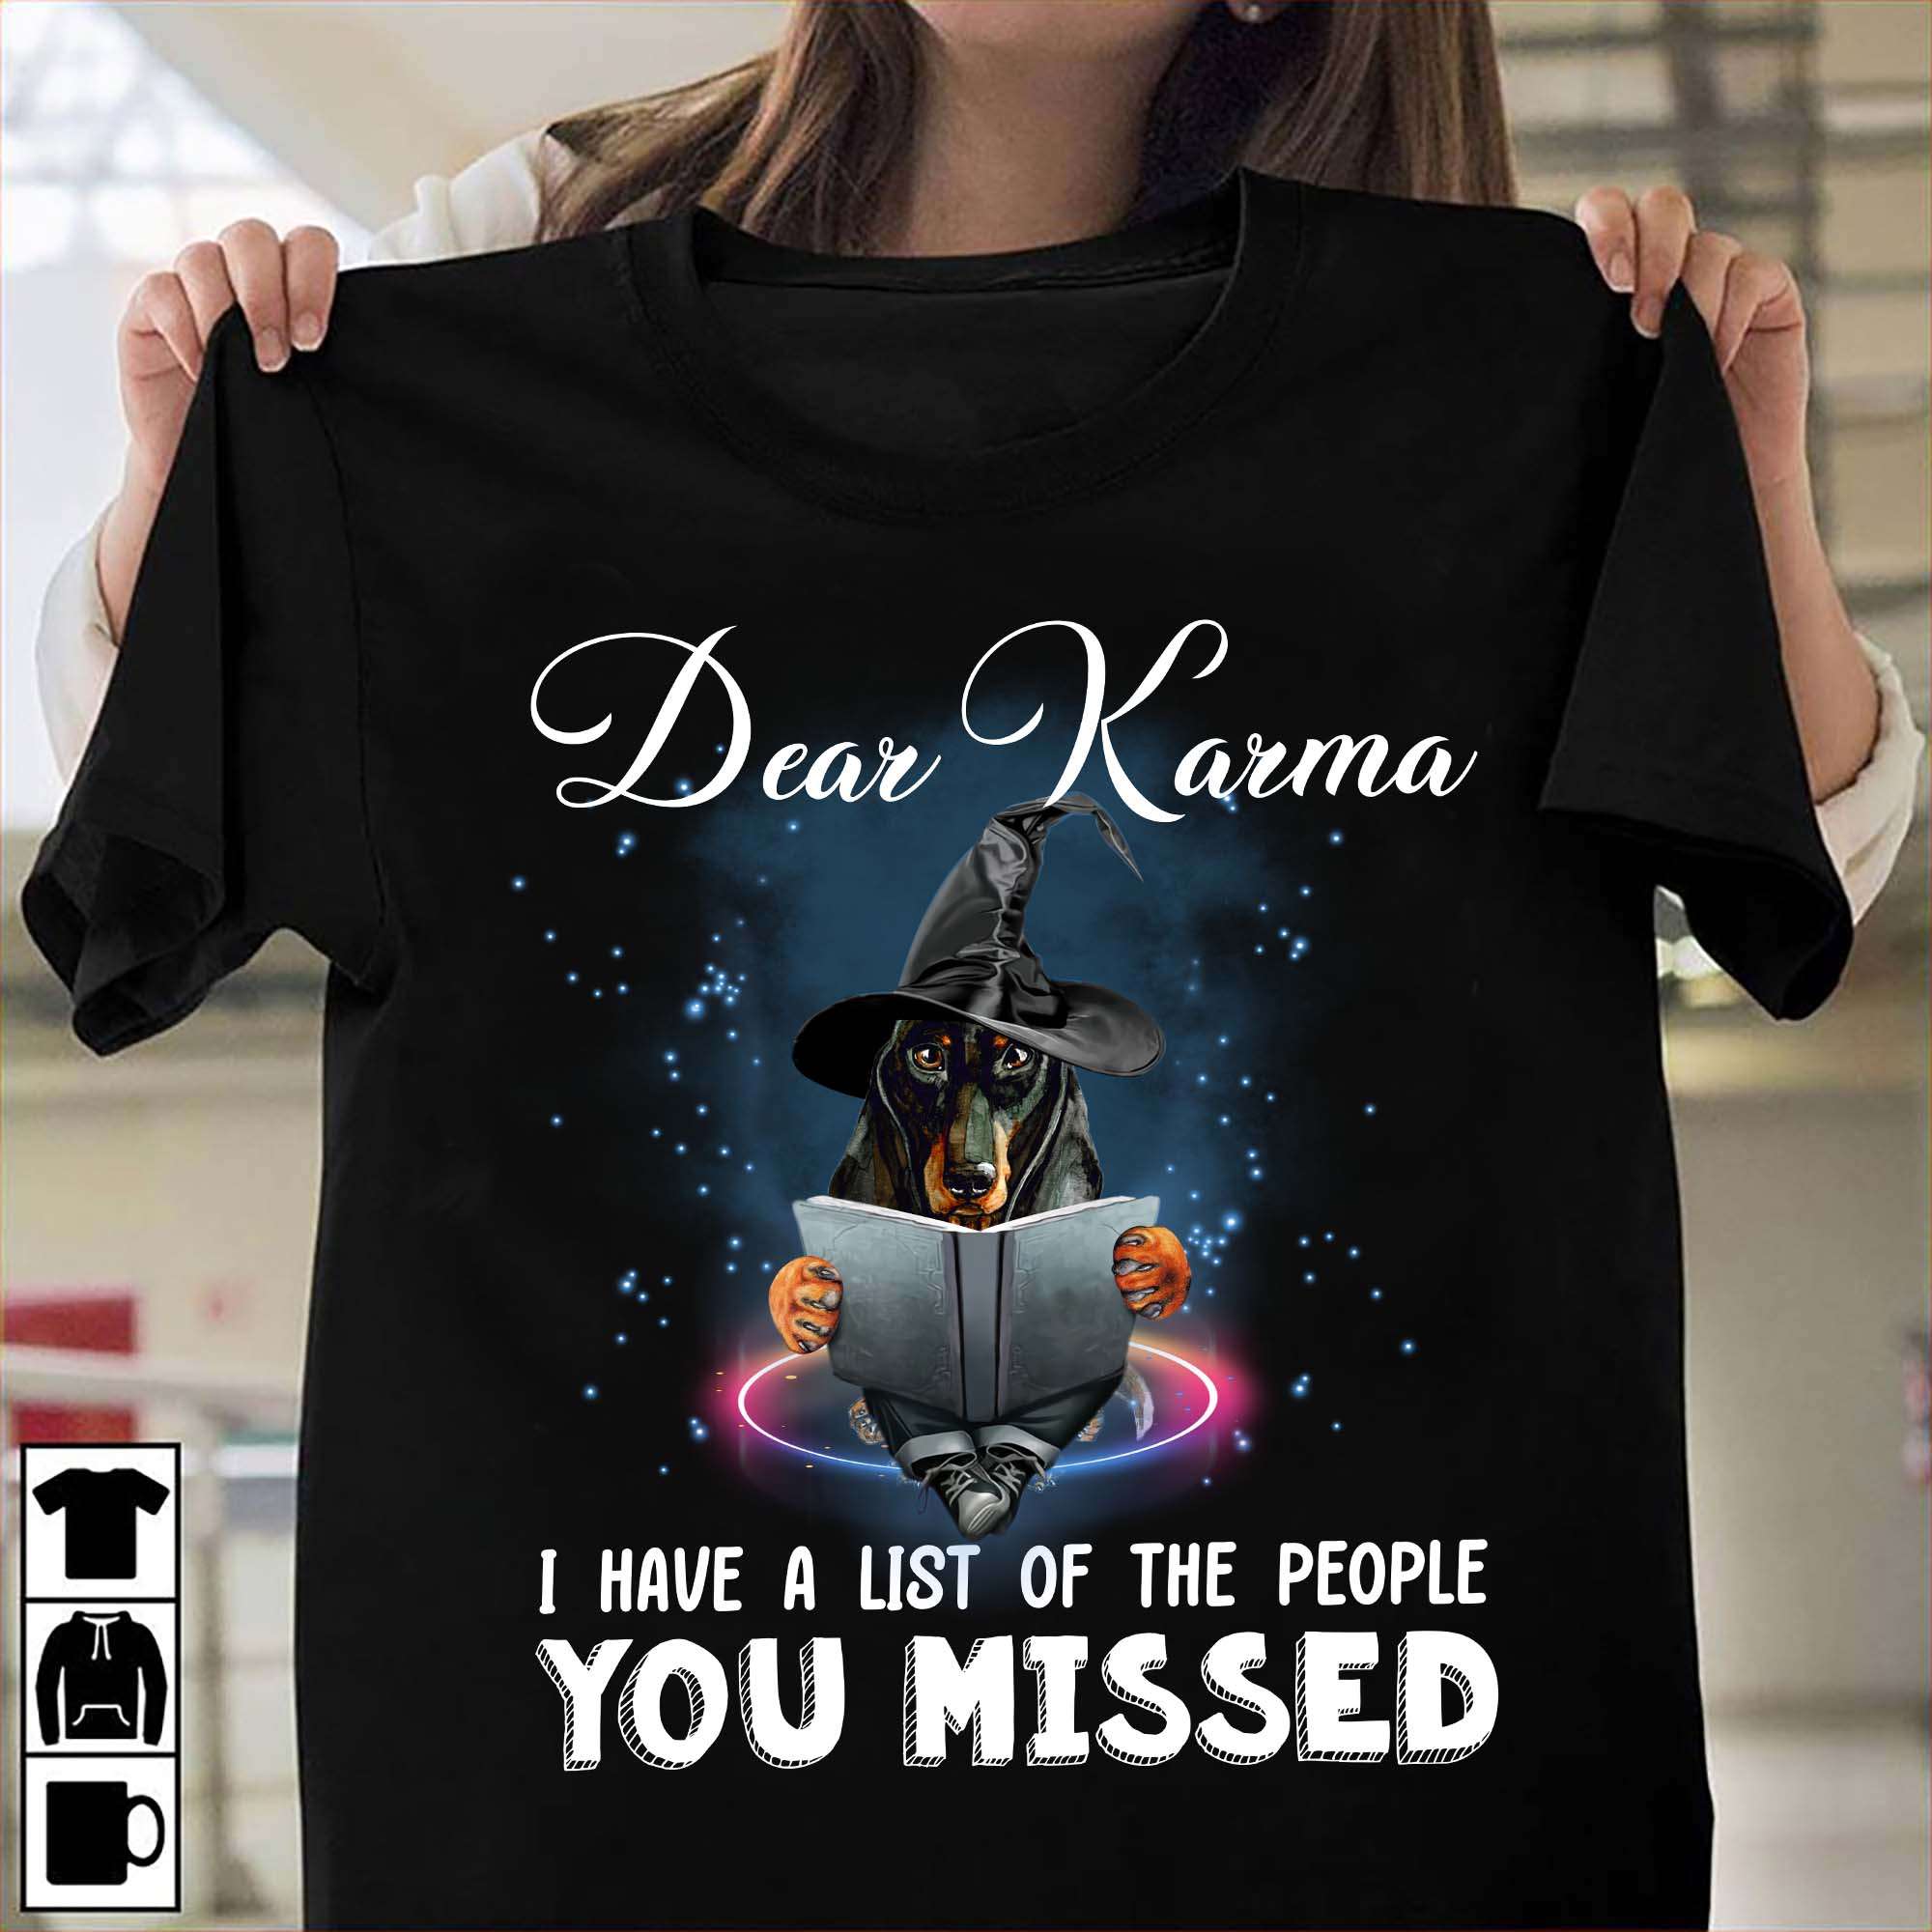 Witch Dachshund Read Book - Dear karma i have a list of the people you missed